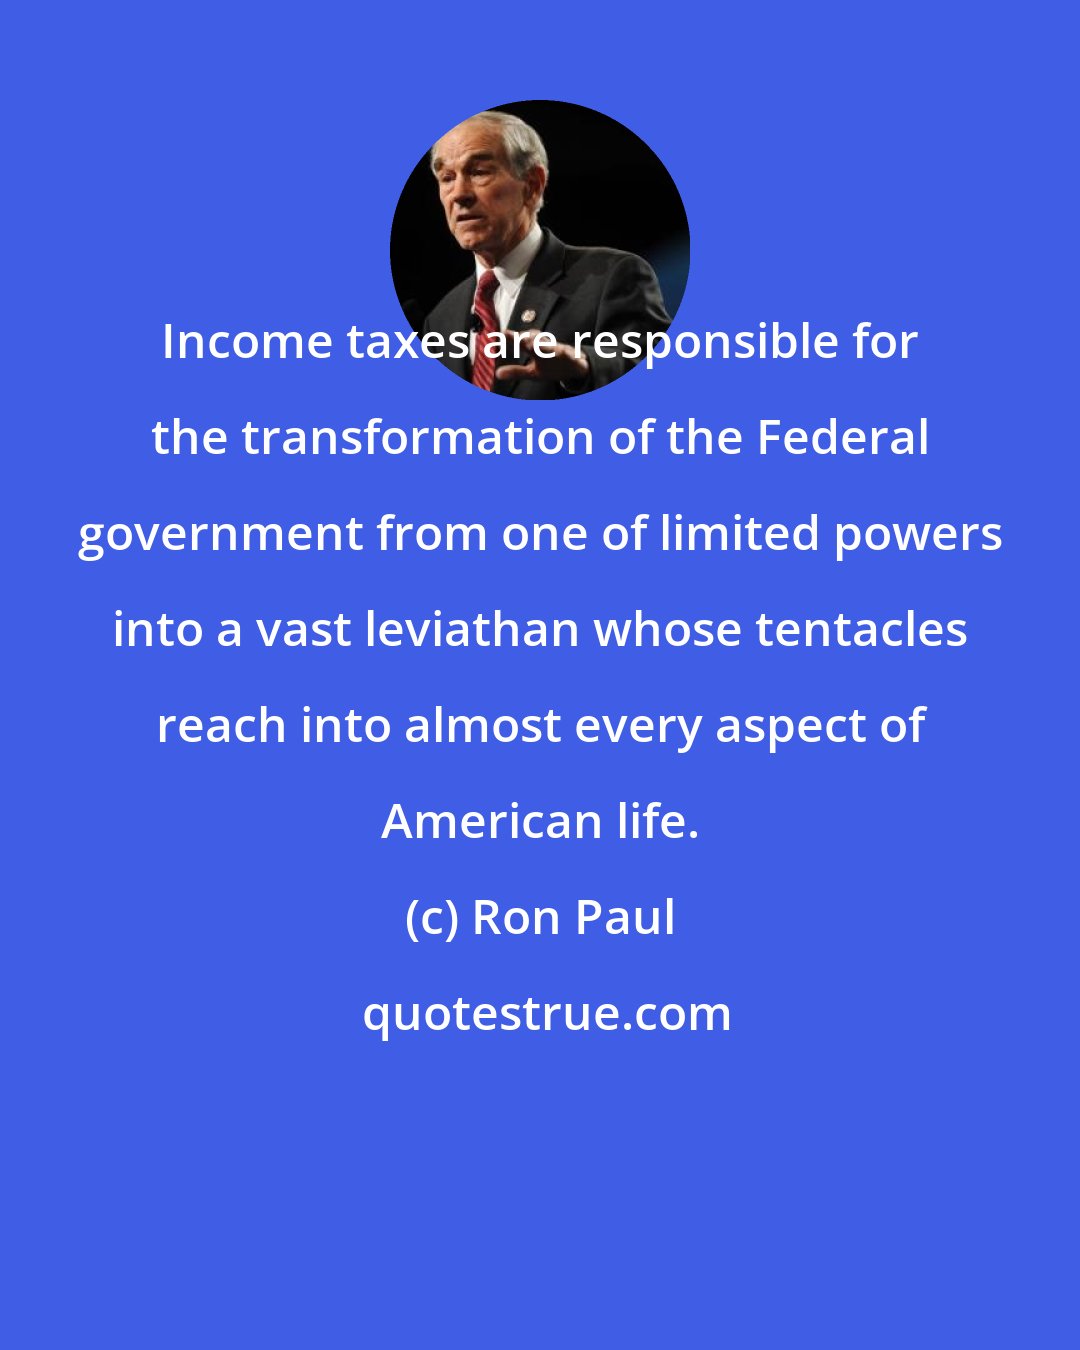 Ron Paul: Income taxes are responsible for the transformation of the Federal government from one of limited powers into a vast leviathan whose tentacles reach into almost every aspect of American life.